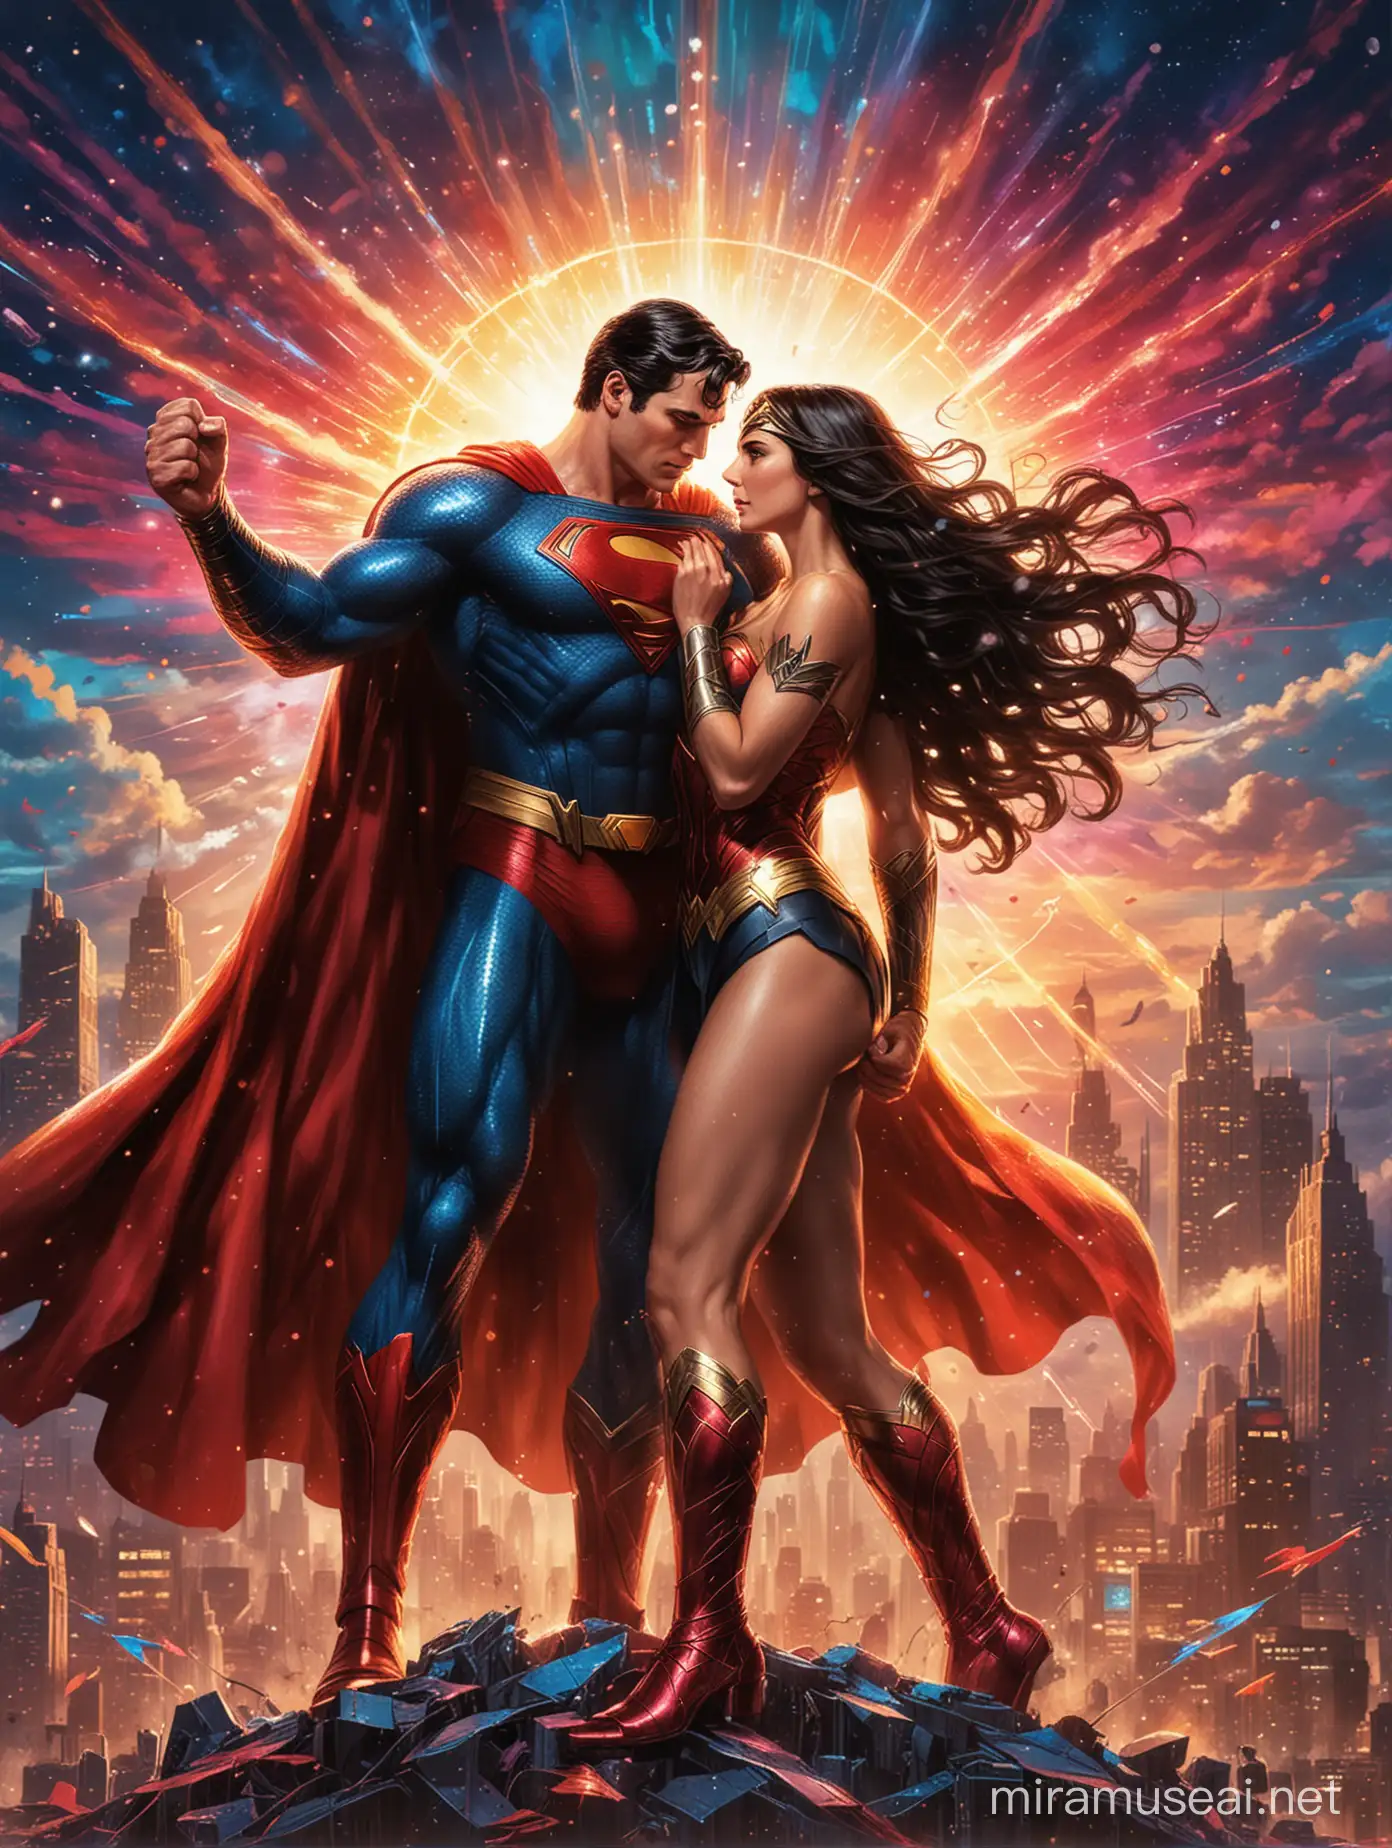 A full body shot of Superman and Wonder Woman engaged in a dynamic, powerful scene of strength and unity. The composition highlights their iconic poses and dynamic interplay, set against a backdrop of a Lite-Brite inspired colorful sky, emphasizing their larger-than-life presence. Superman's muscles ripple as he lifts Wonder Woman effortlessly in his arms, her mysterious smile radiating with wisdom and courage. Their aura of unbreakable strength and love is palpable, embodying the essence of hope and justice. --ar 9:16